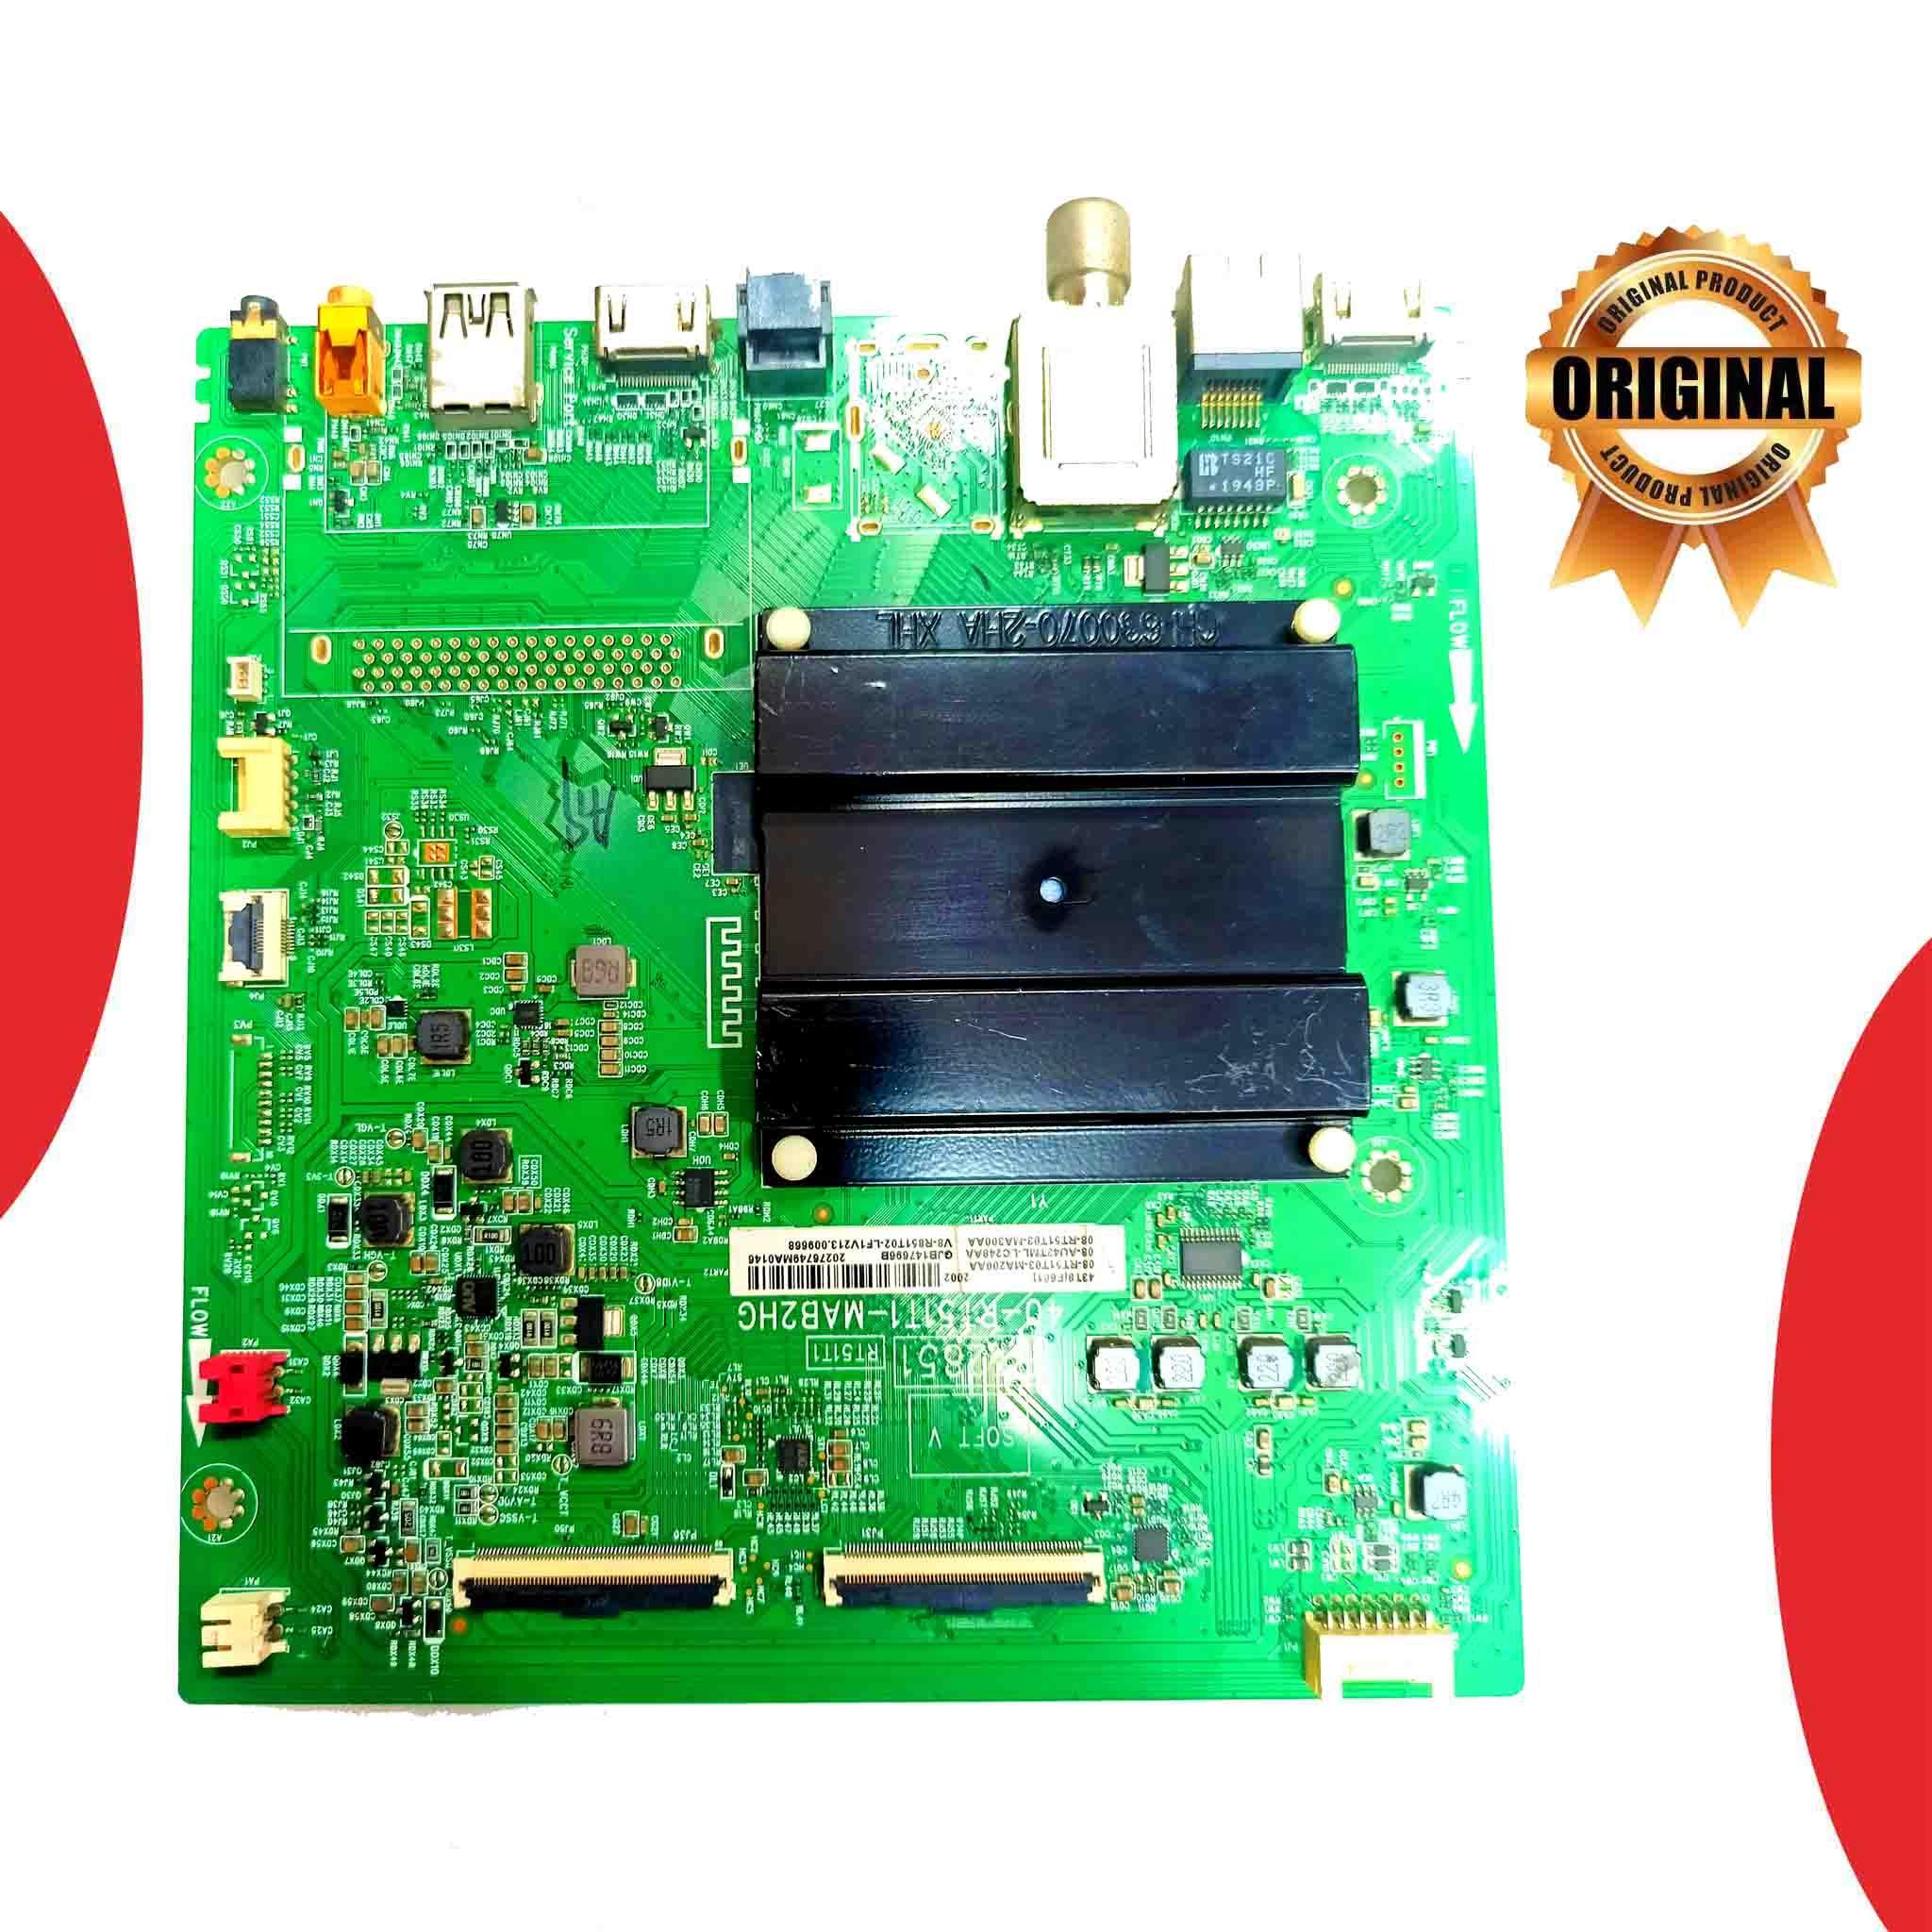 Model 43P8 TCL LED TV Motherboard - Great Bharat Electronics